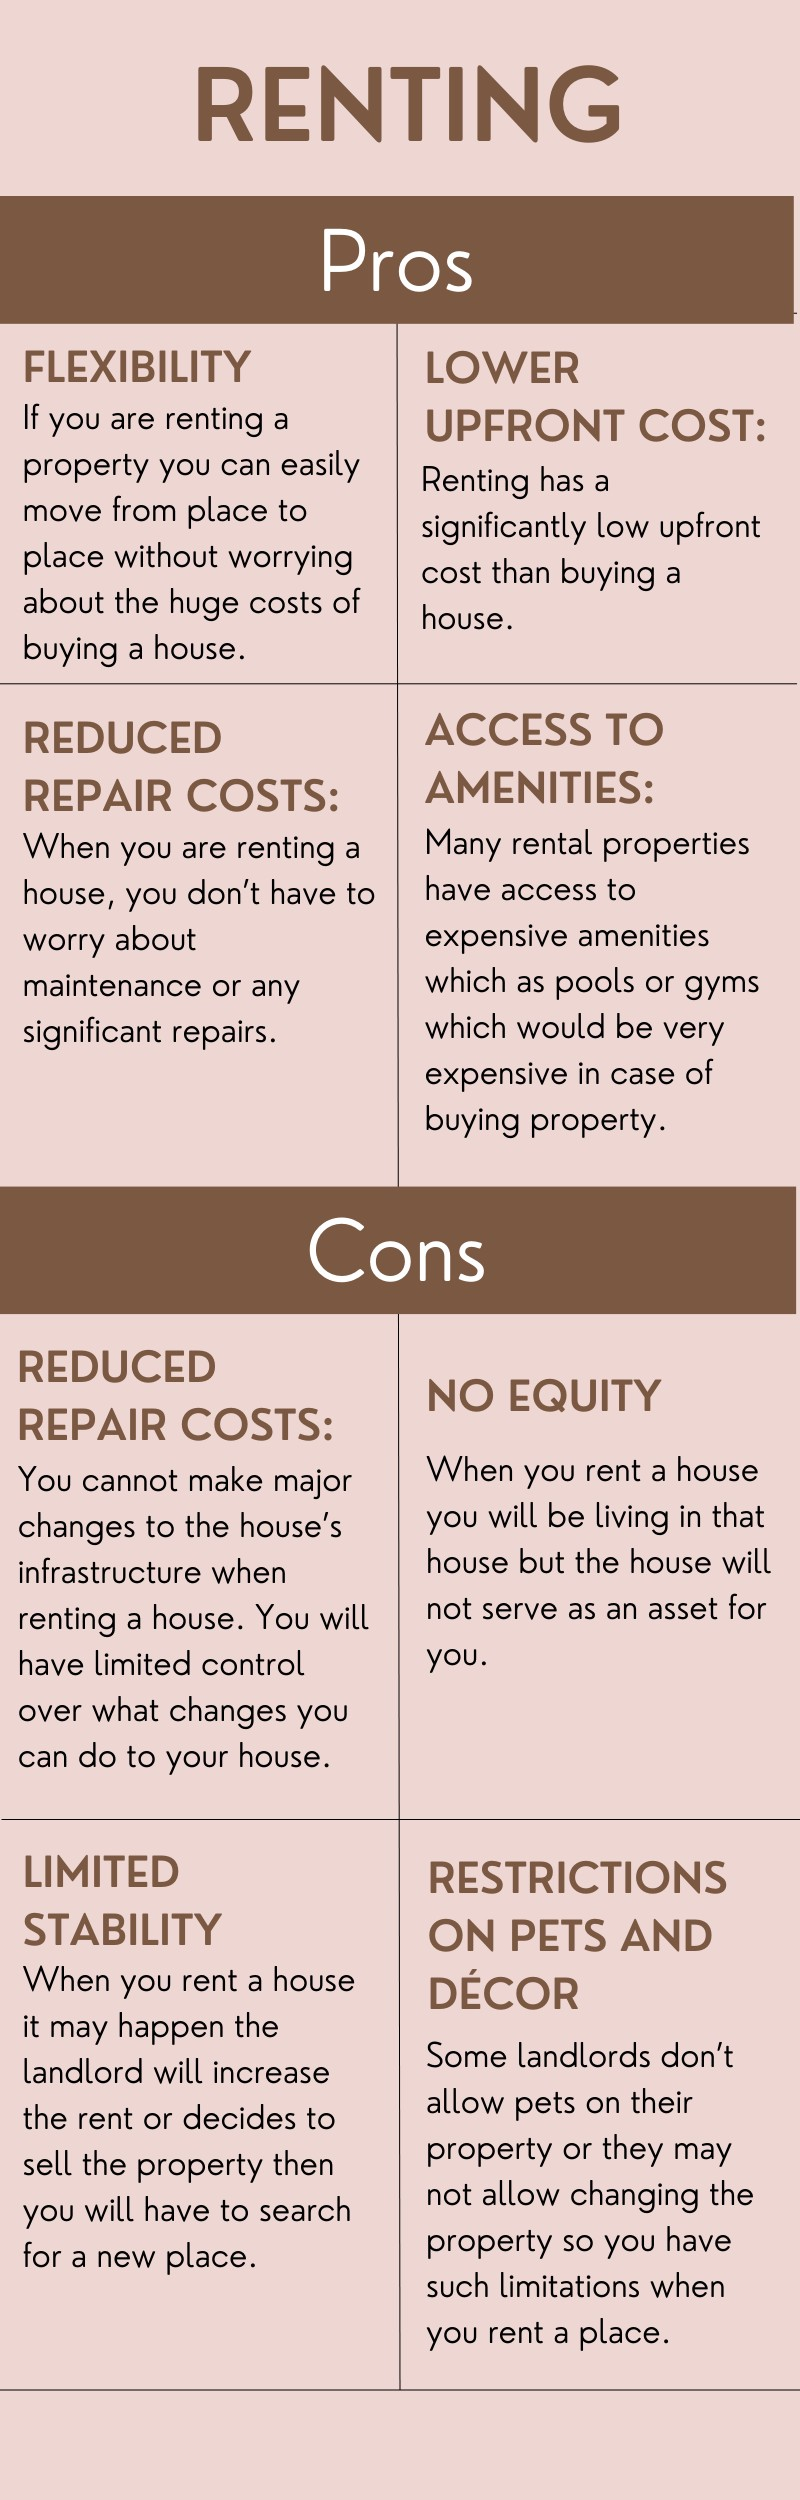 Renting Pros & Cons